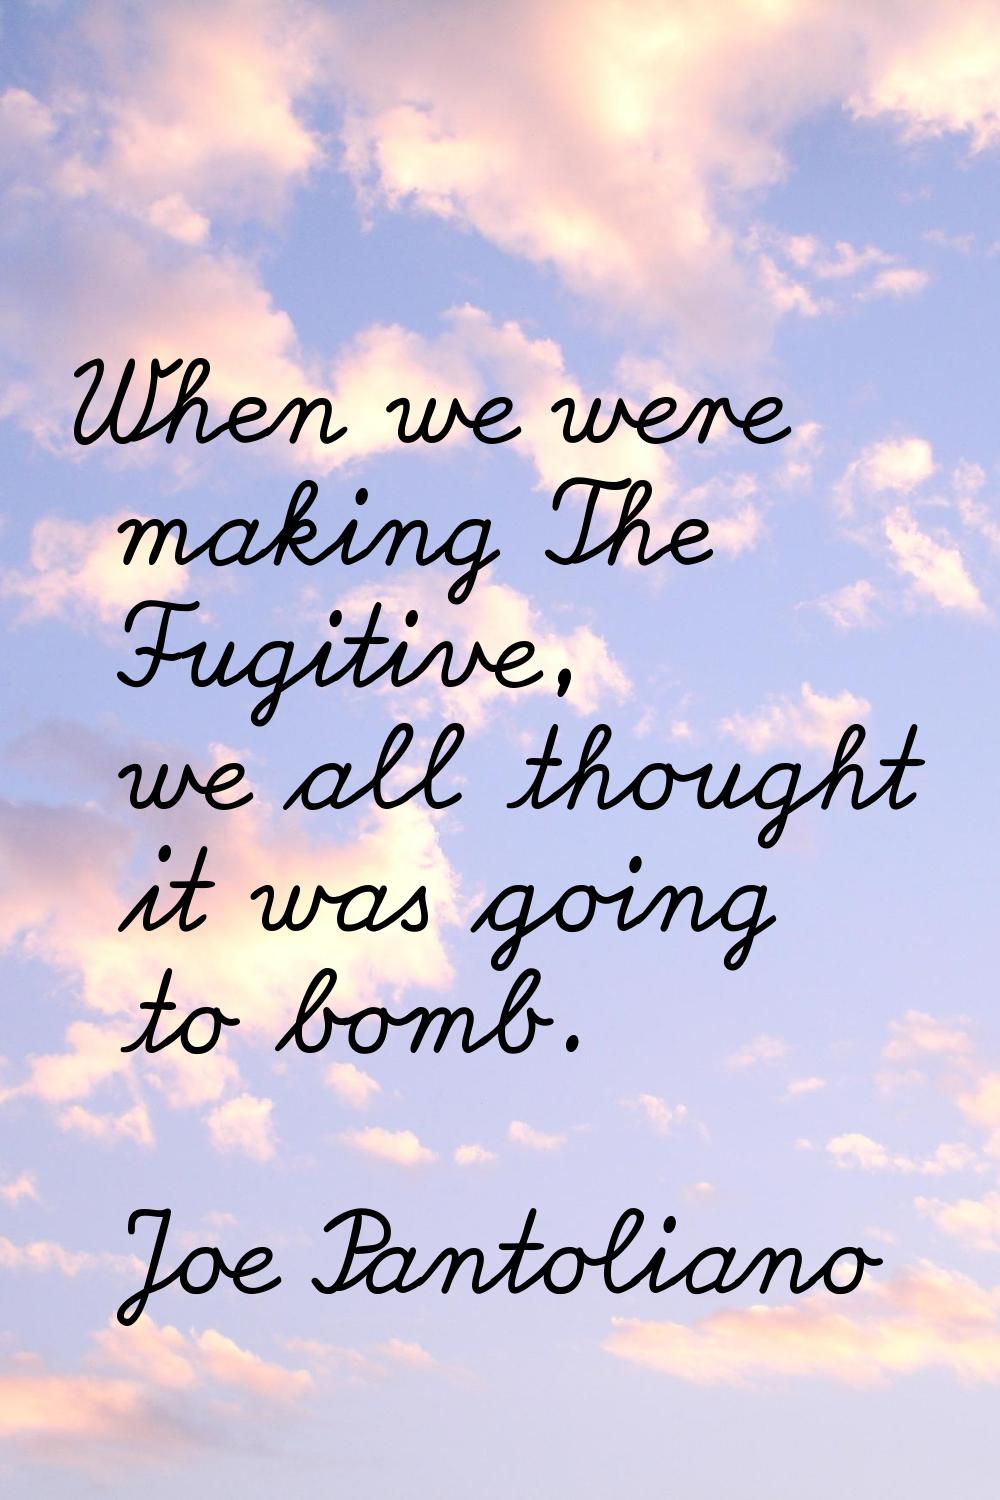 When we were making The Fugitive, we all thought it was going to bomb.